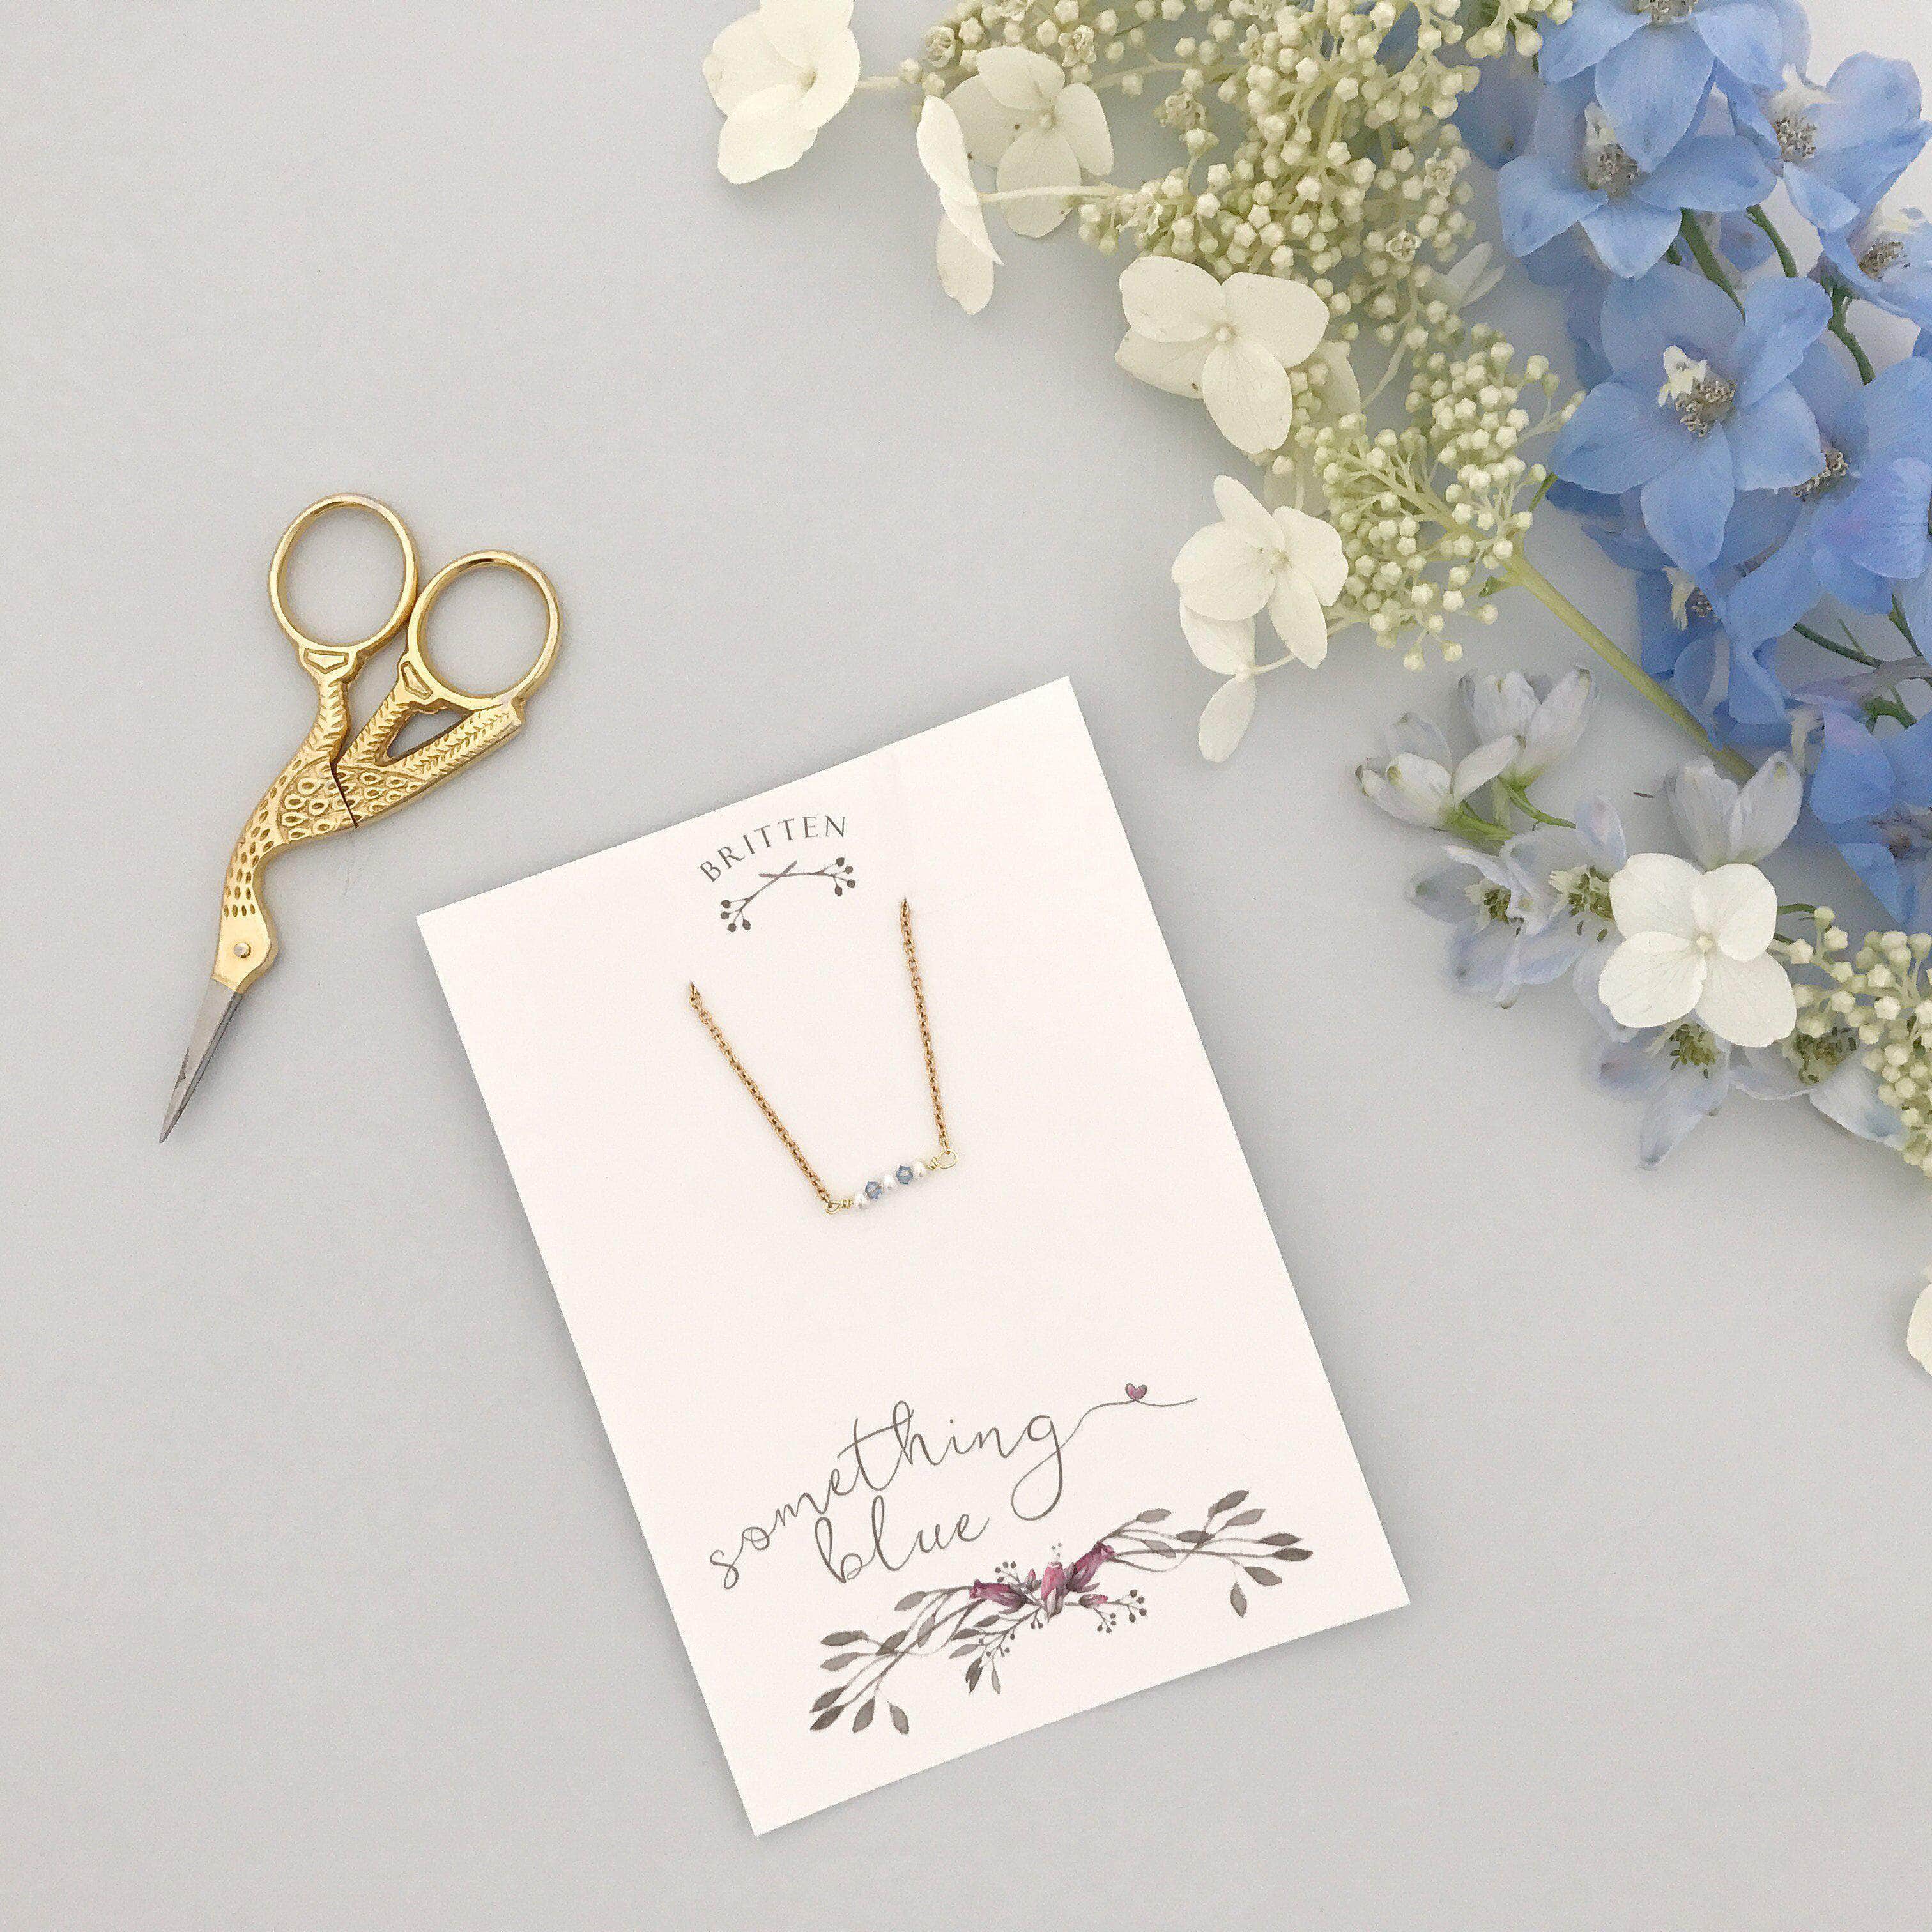 'Something blue' gift necklace - 'Mollie' in gold | Britten Weddings